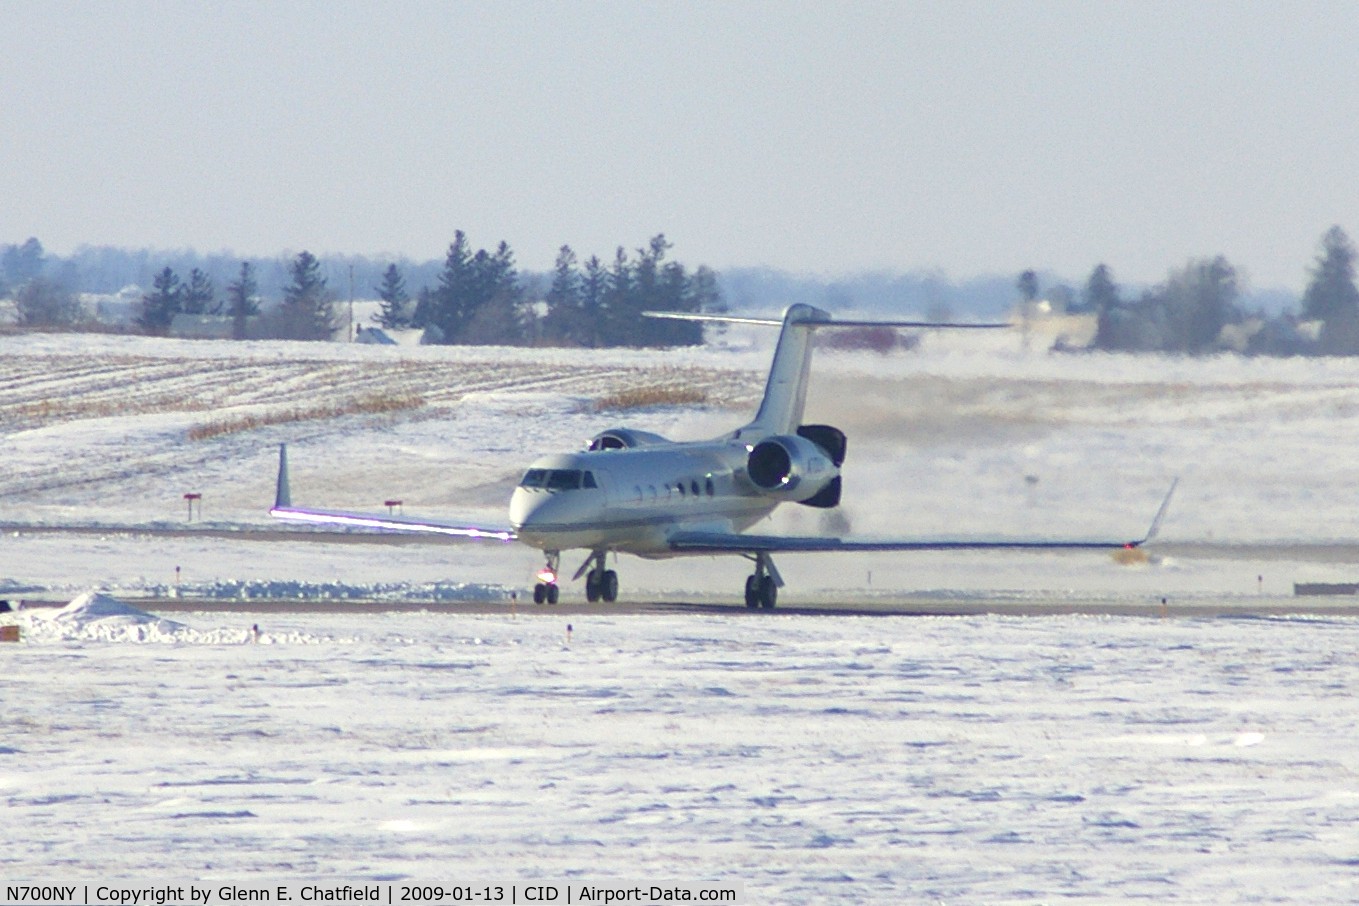 N700NY, 2001 Gulfstream Aerospace G-IV C/N 1468, About 3/4 mile from my window, just off Runway 27